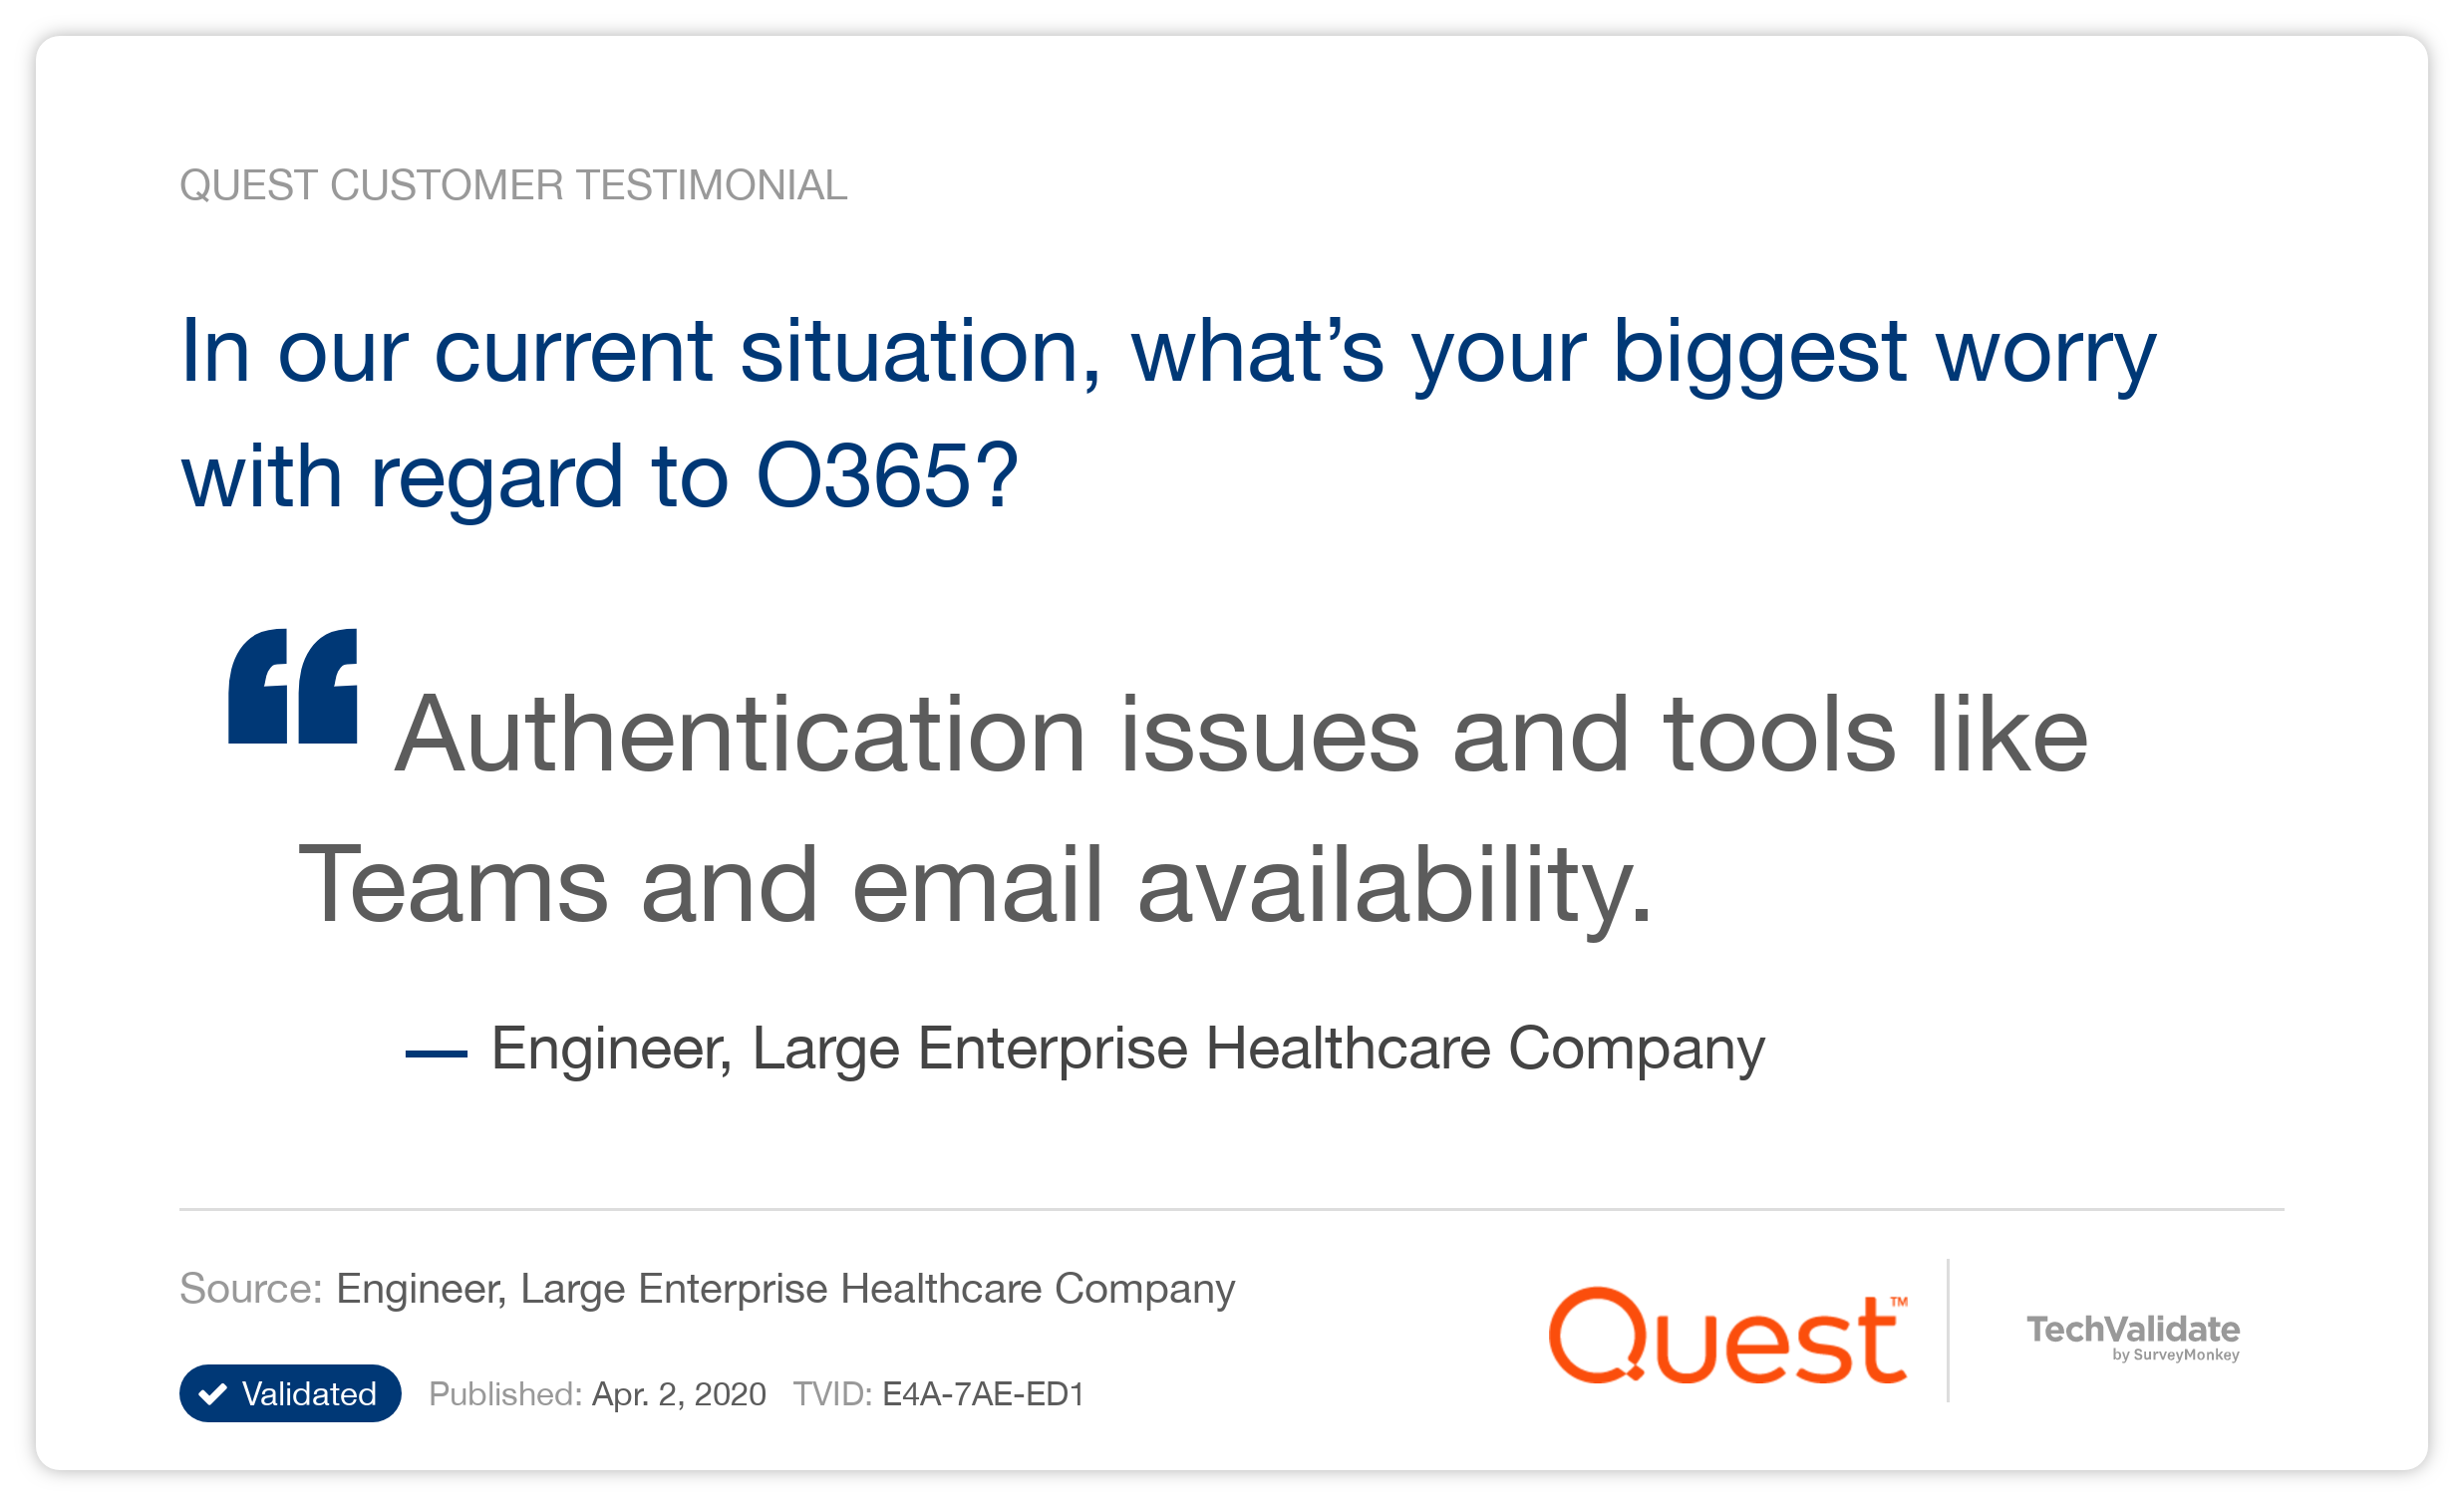 In our current situation, what's your biggest worry with regard to O365?